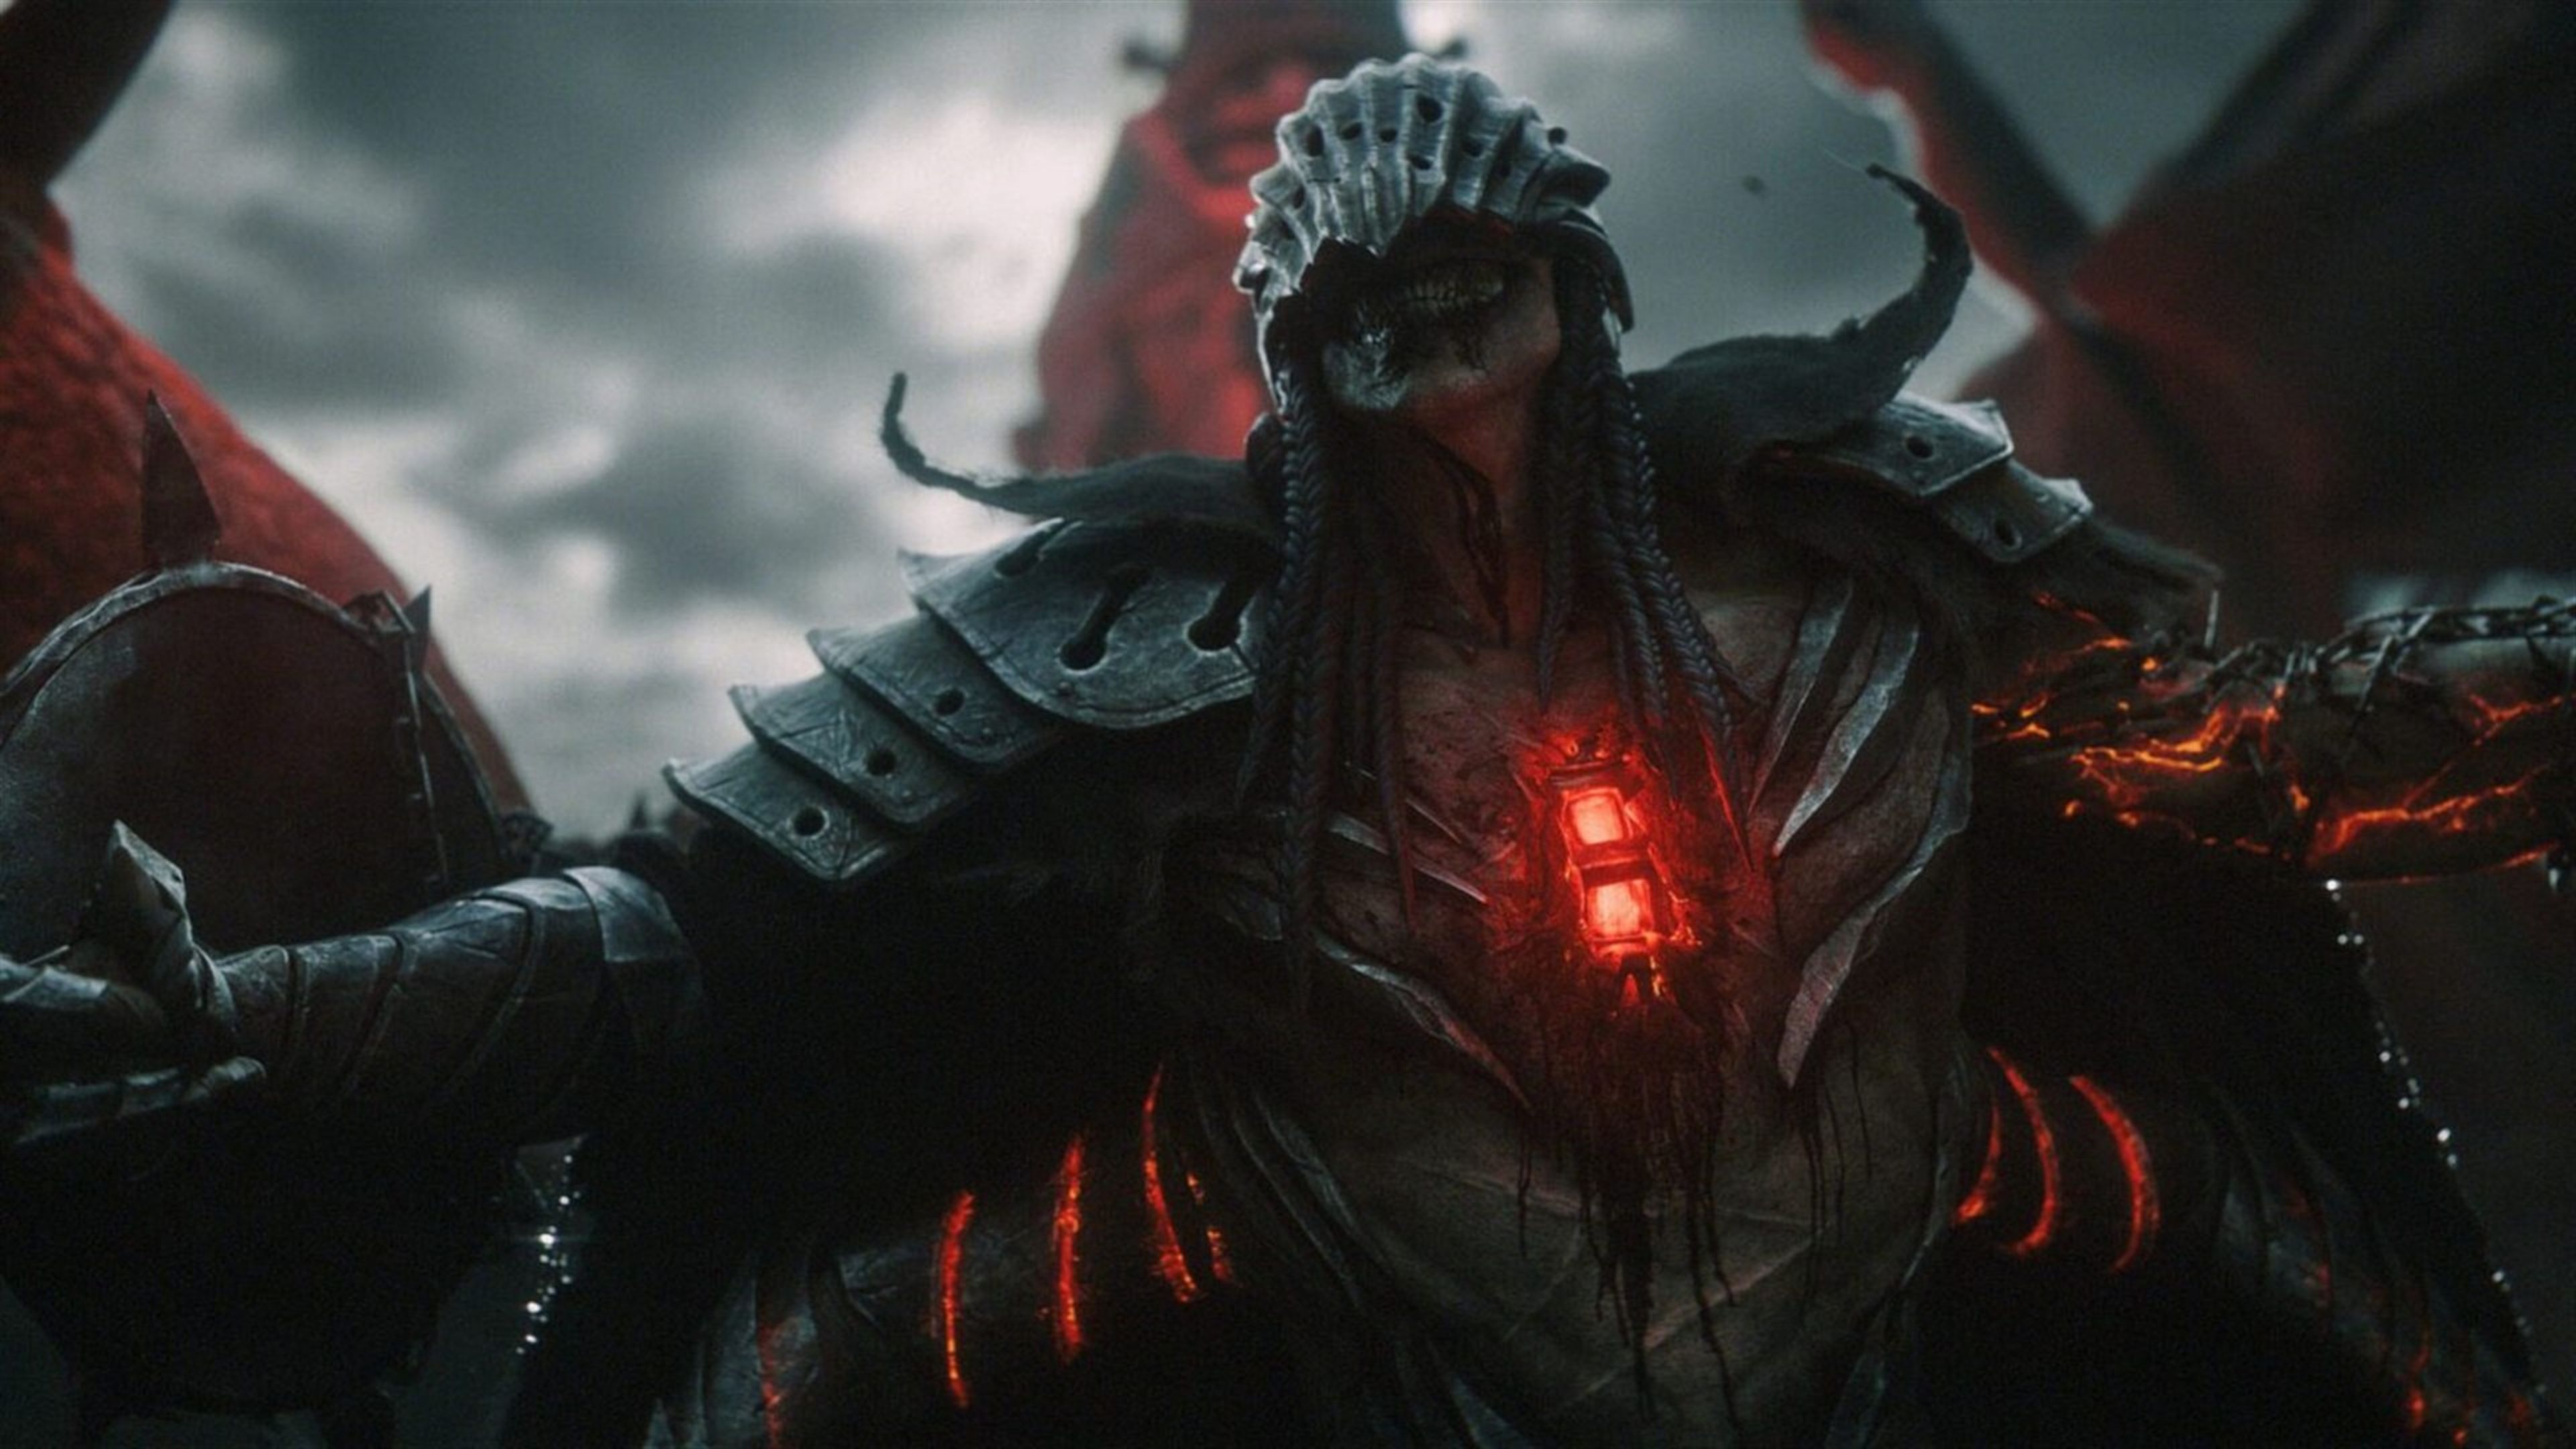 The Demon God Adyr Returns in the Exciting Launch Trailer for Lords of the Fallen